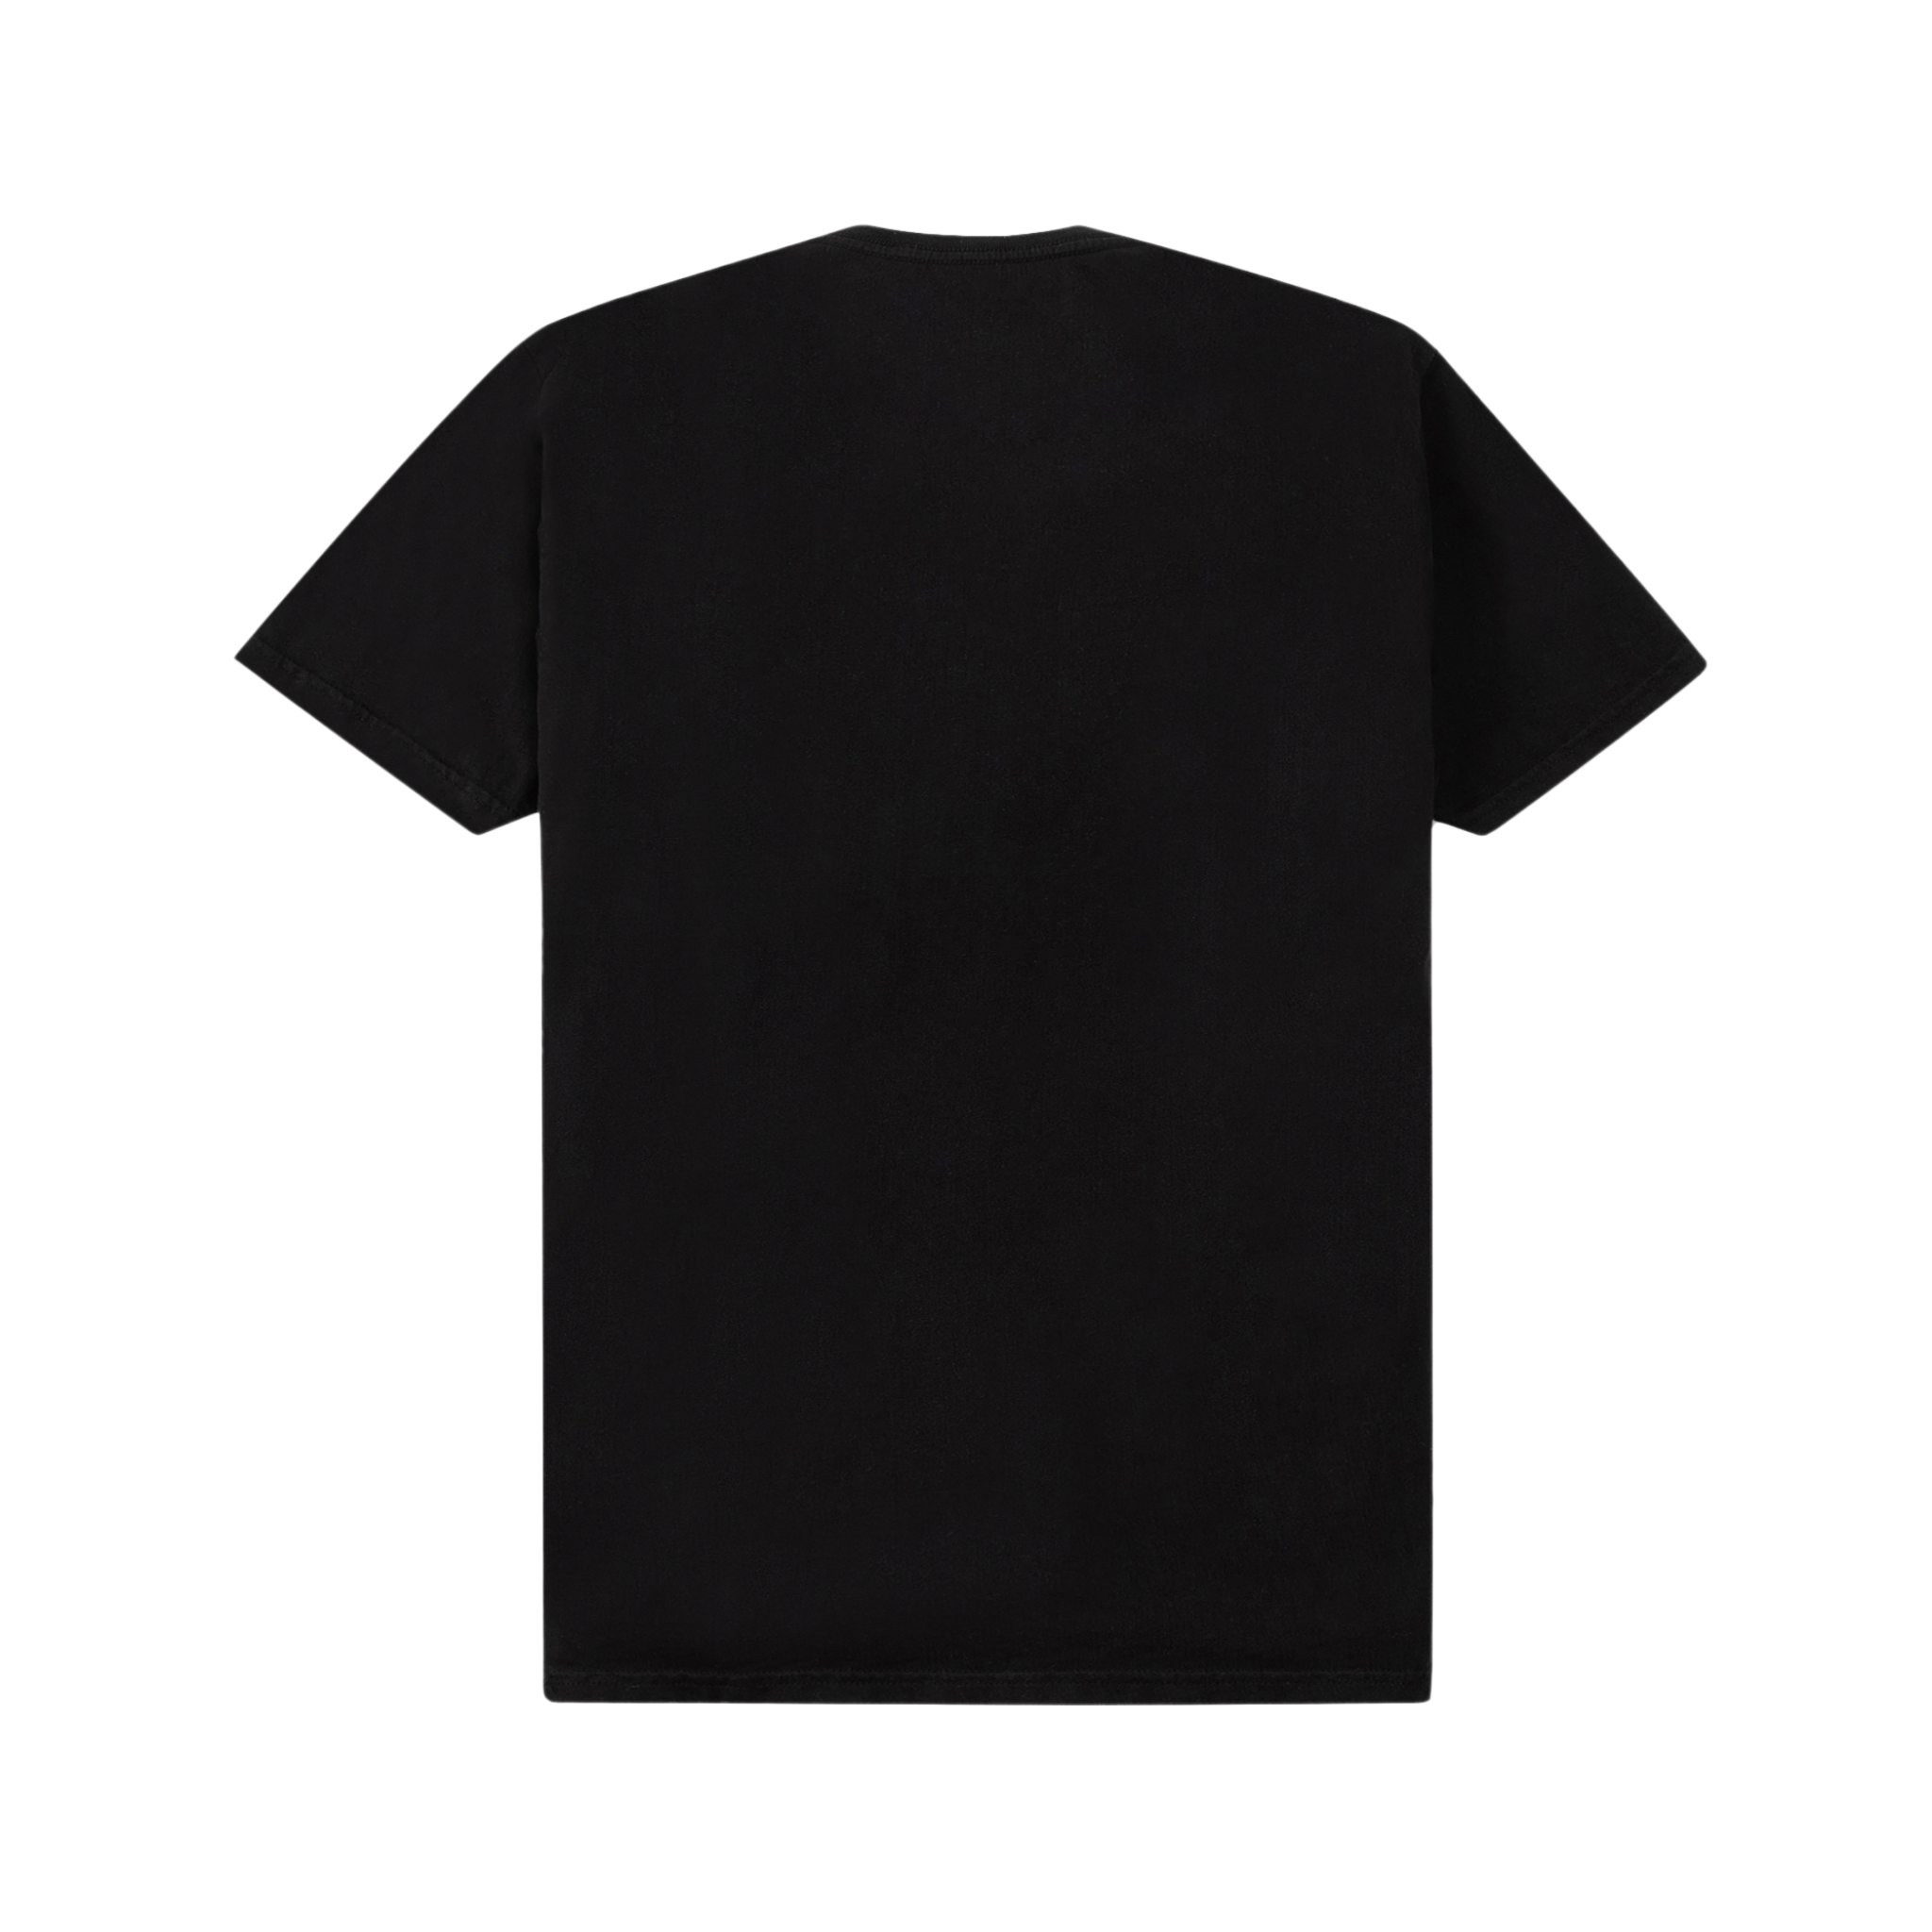 Paper Planes Colorful Reflection Tee (Black)